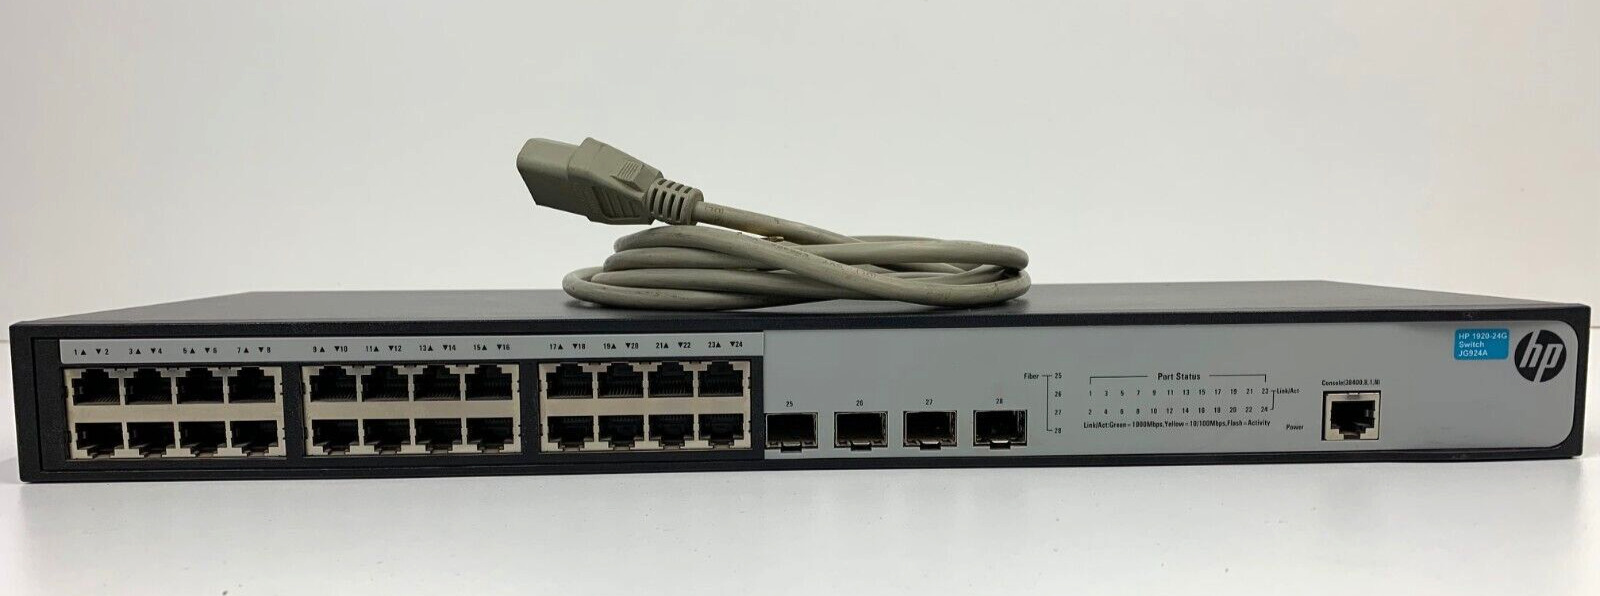 HPE Office Connect 1920-24G HP Managed Gigabit Ethernet Network Switch JG924A